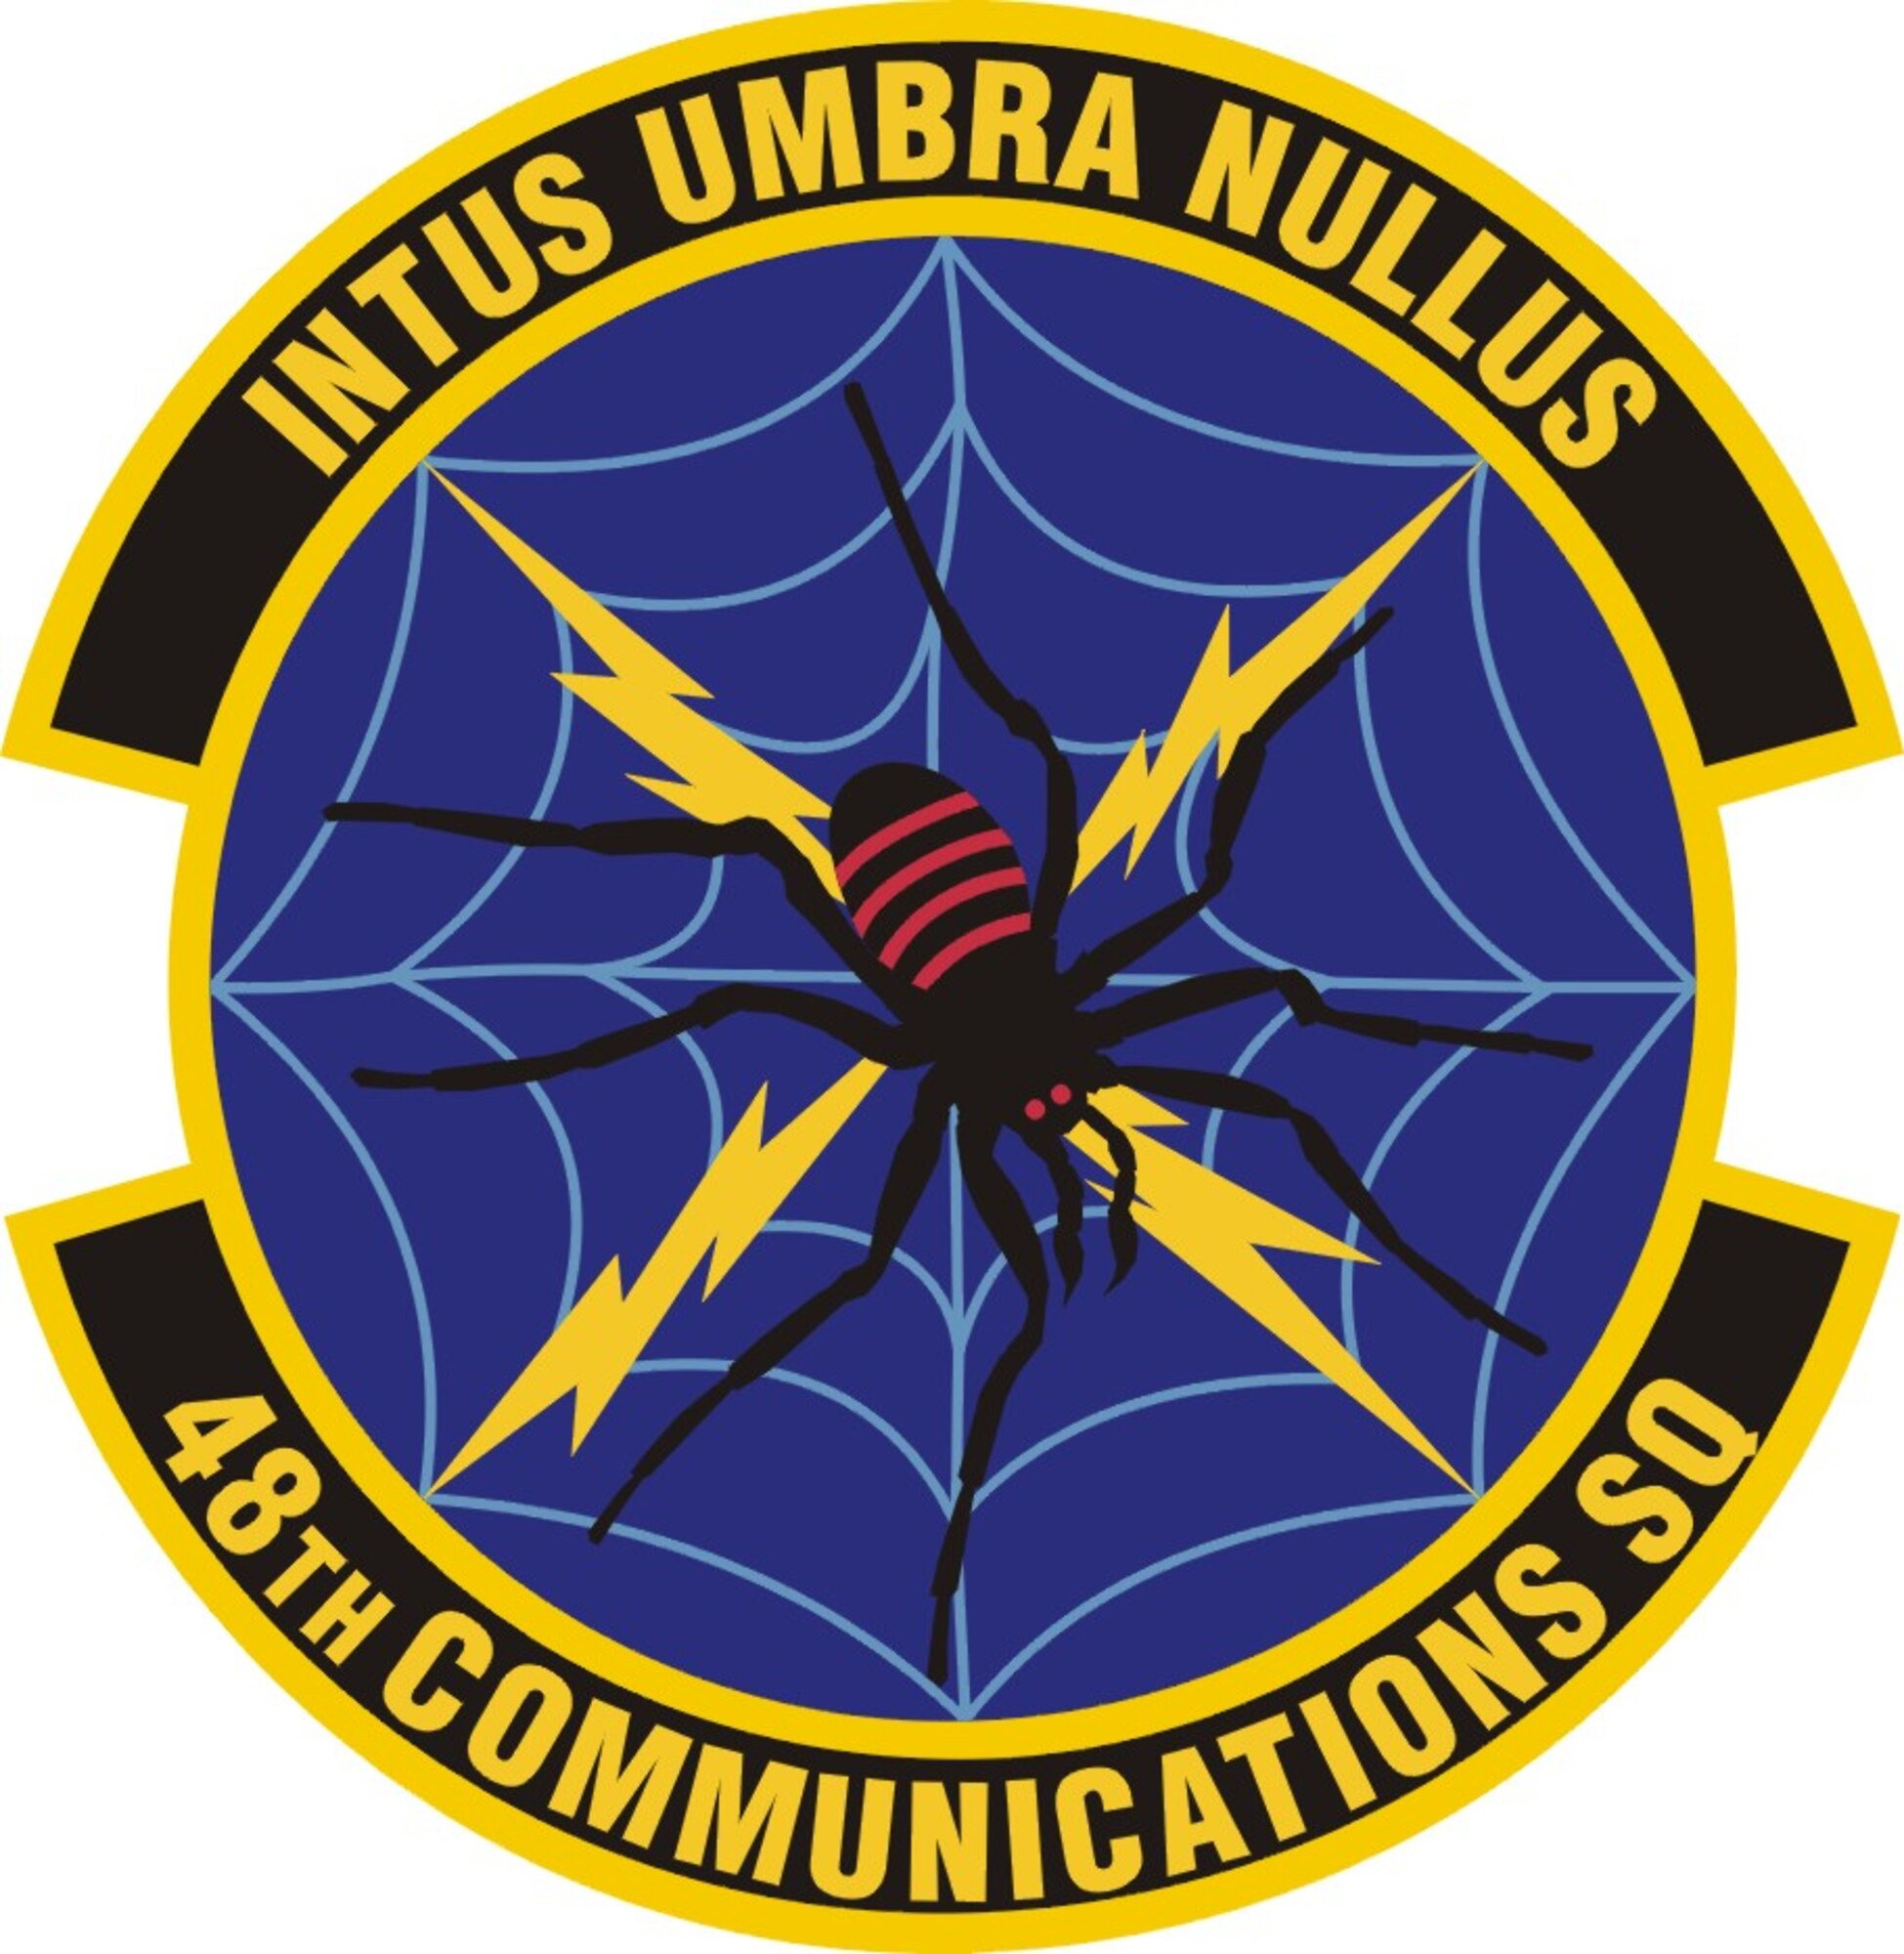 The 48th Communications Squadron ‘Spiders’ play an integral role in keeping the 48th Fighter Wing’s web of communications systems up and running They provide service to approximately 5,500 users across 25 organizations. (U.S. Air Force official graphic)